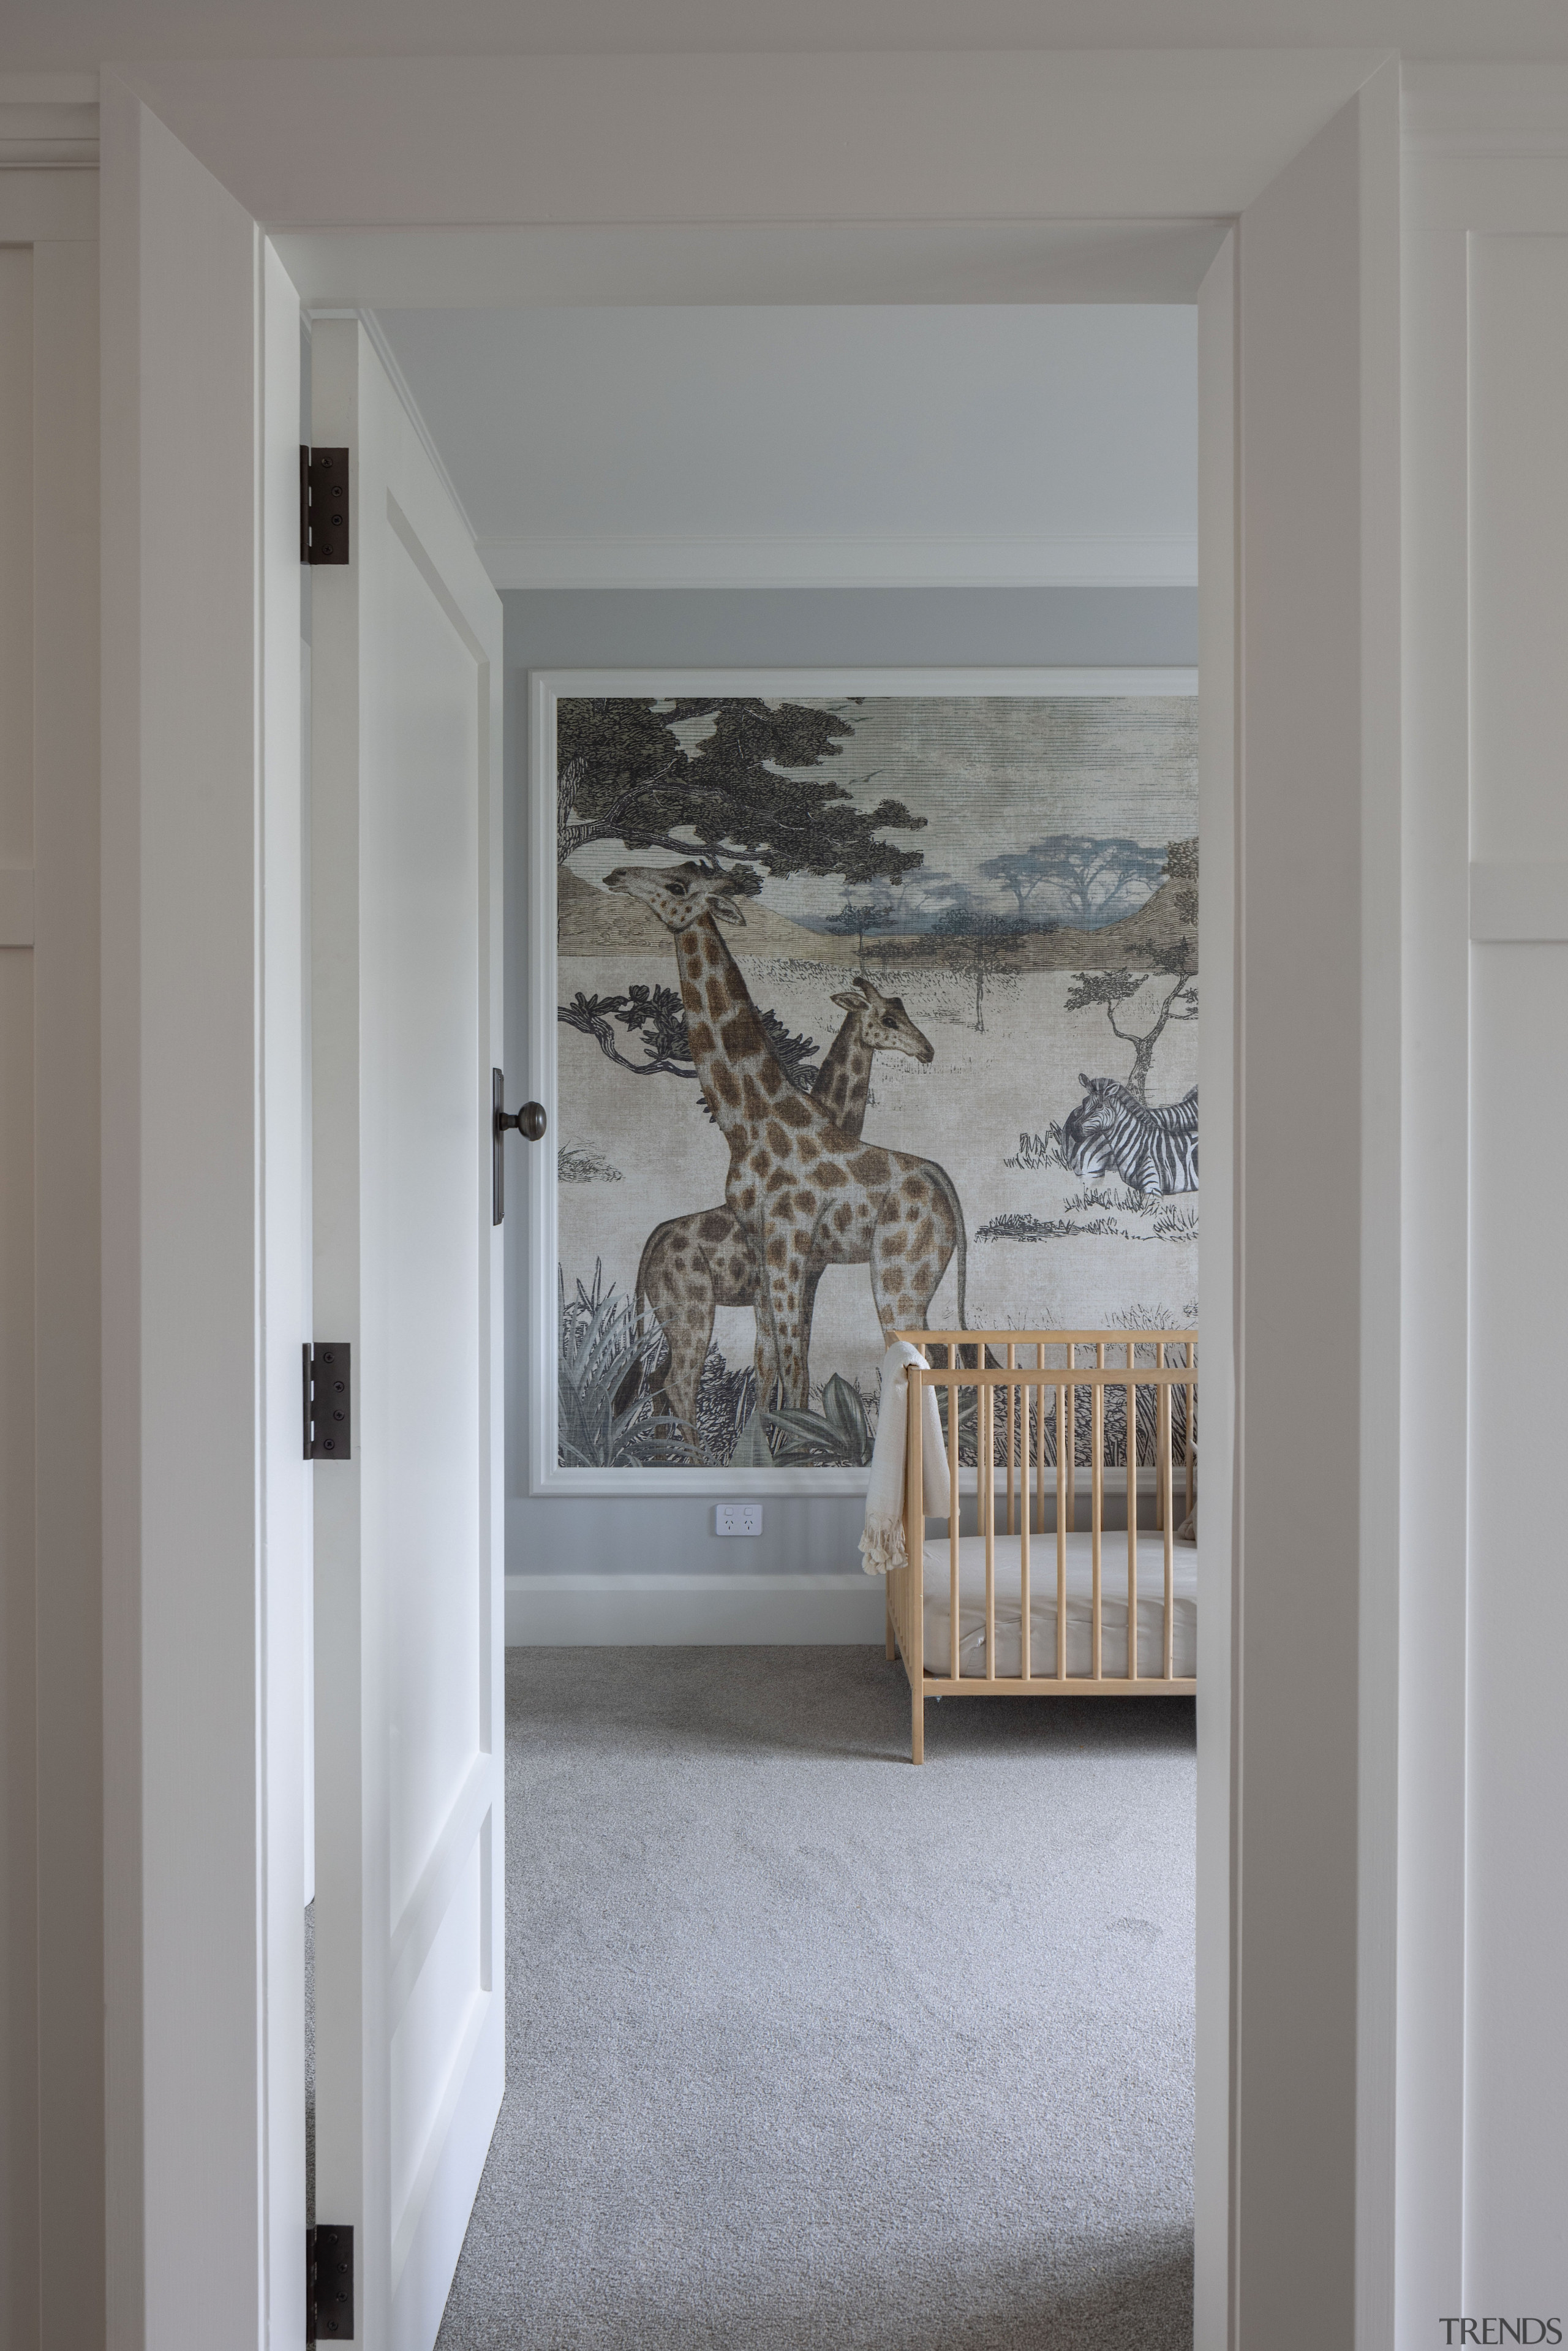 Serengeti wallpaper by Borastapeter brings out the wild 